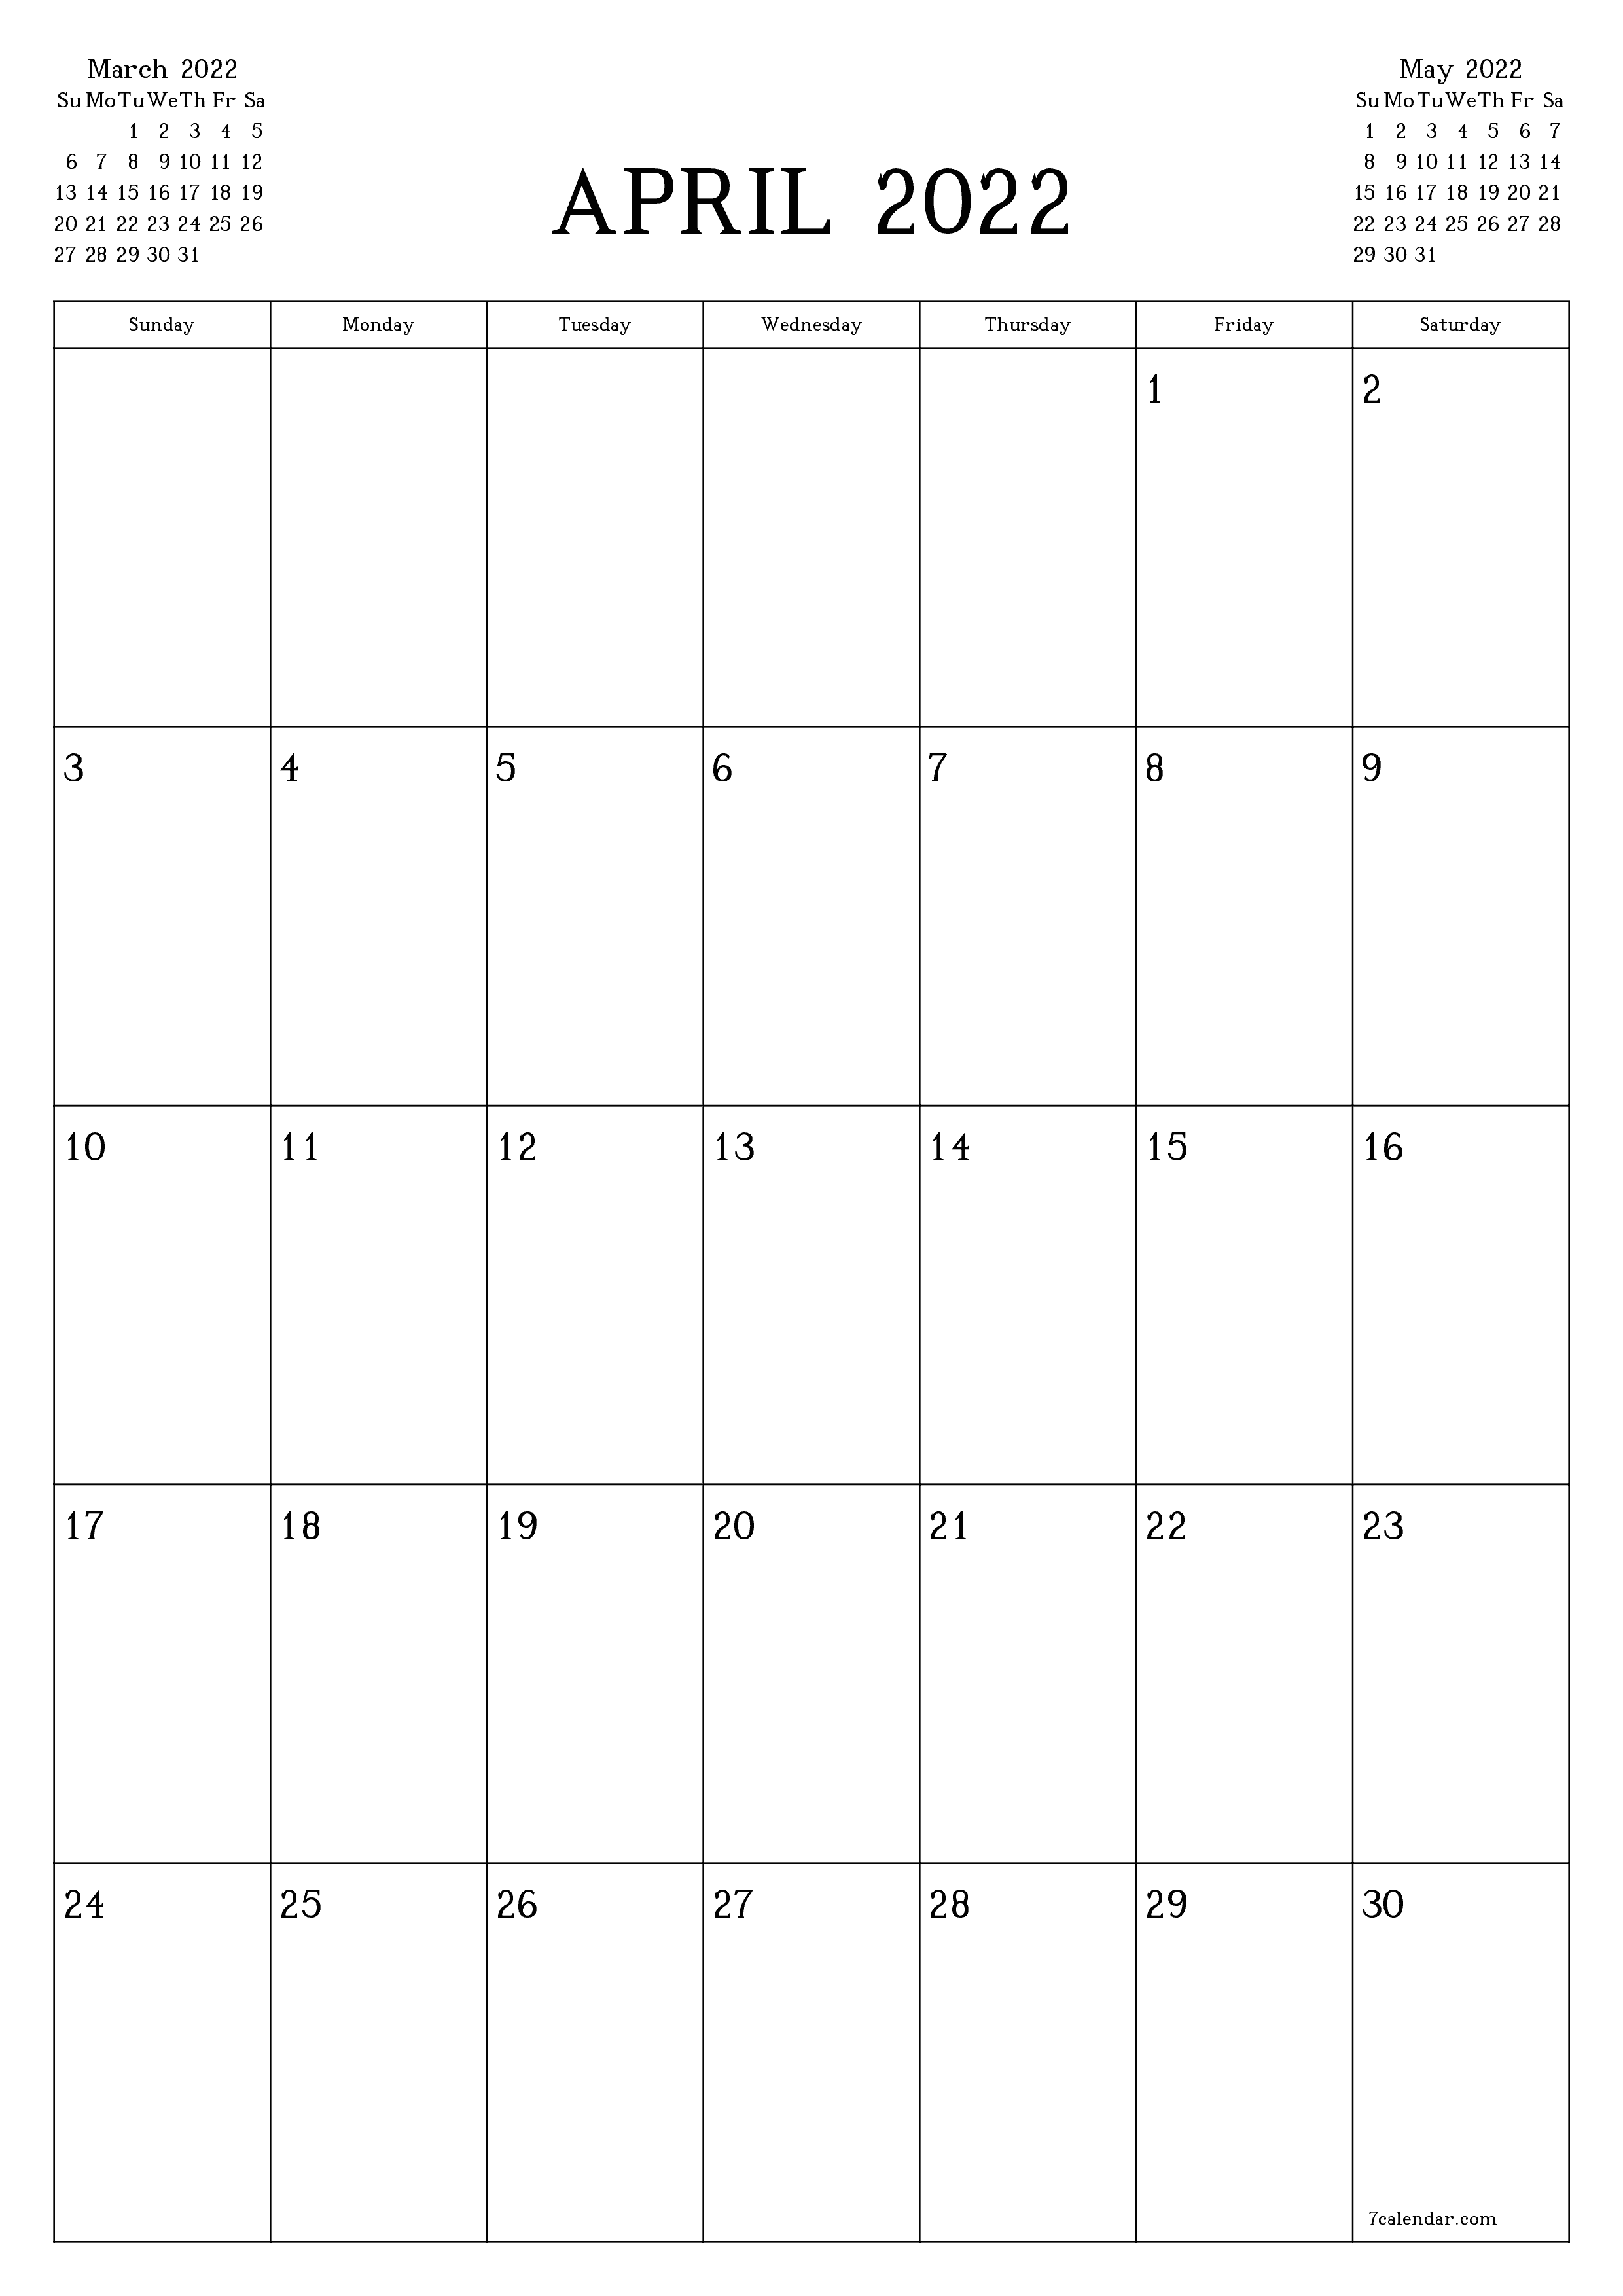 Blank monthly printable calendar and planner for month April 2022 with notes save and print to PDF PNG English - 7calendar.com